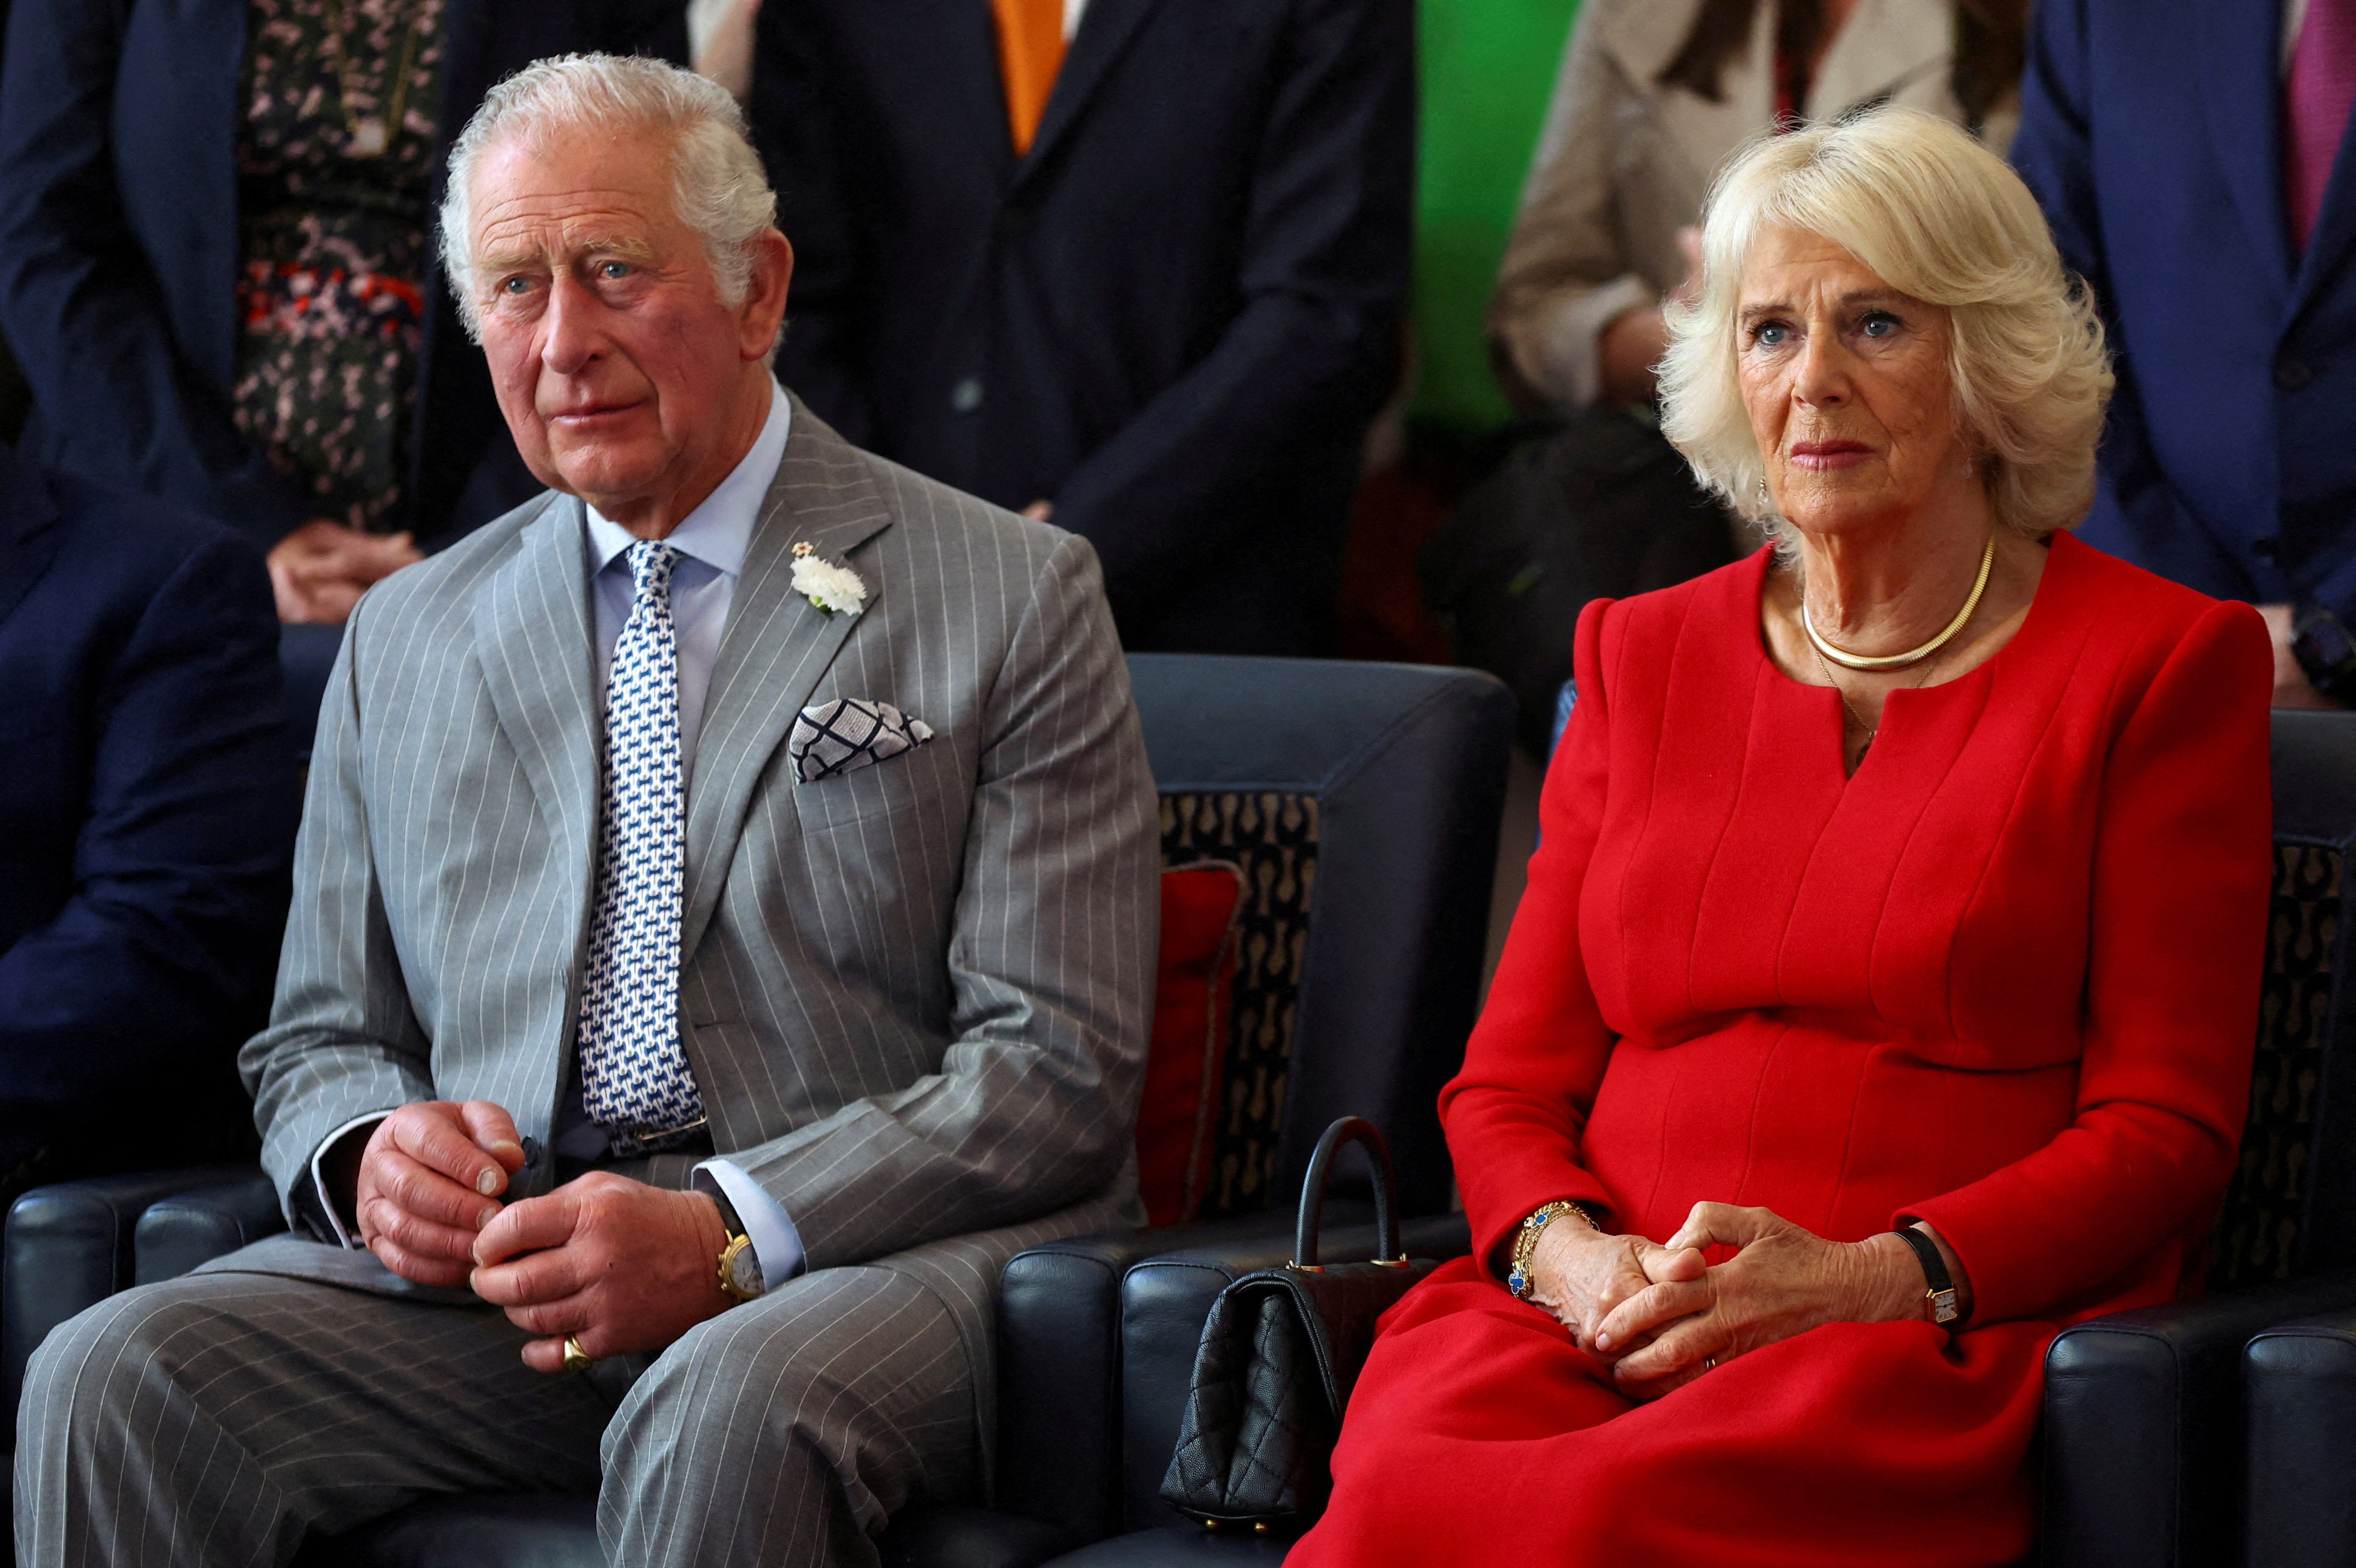 Britain's Prince Charles and Camilla, Duchess of Cornwall visit Canada House in London